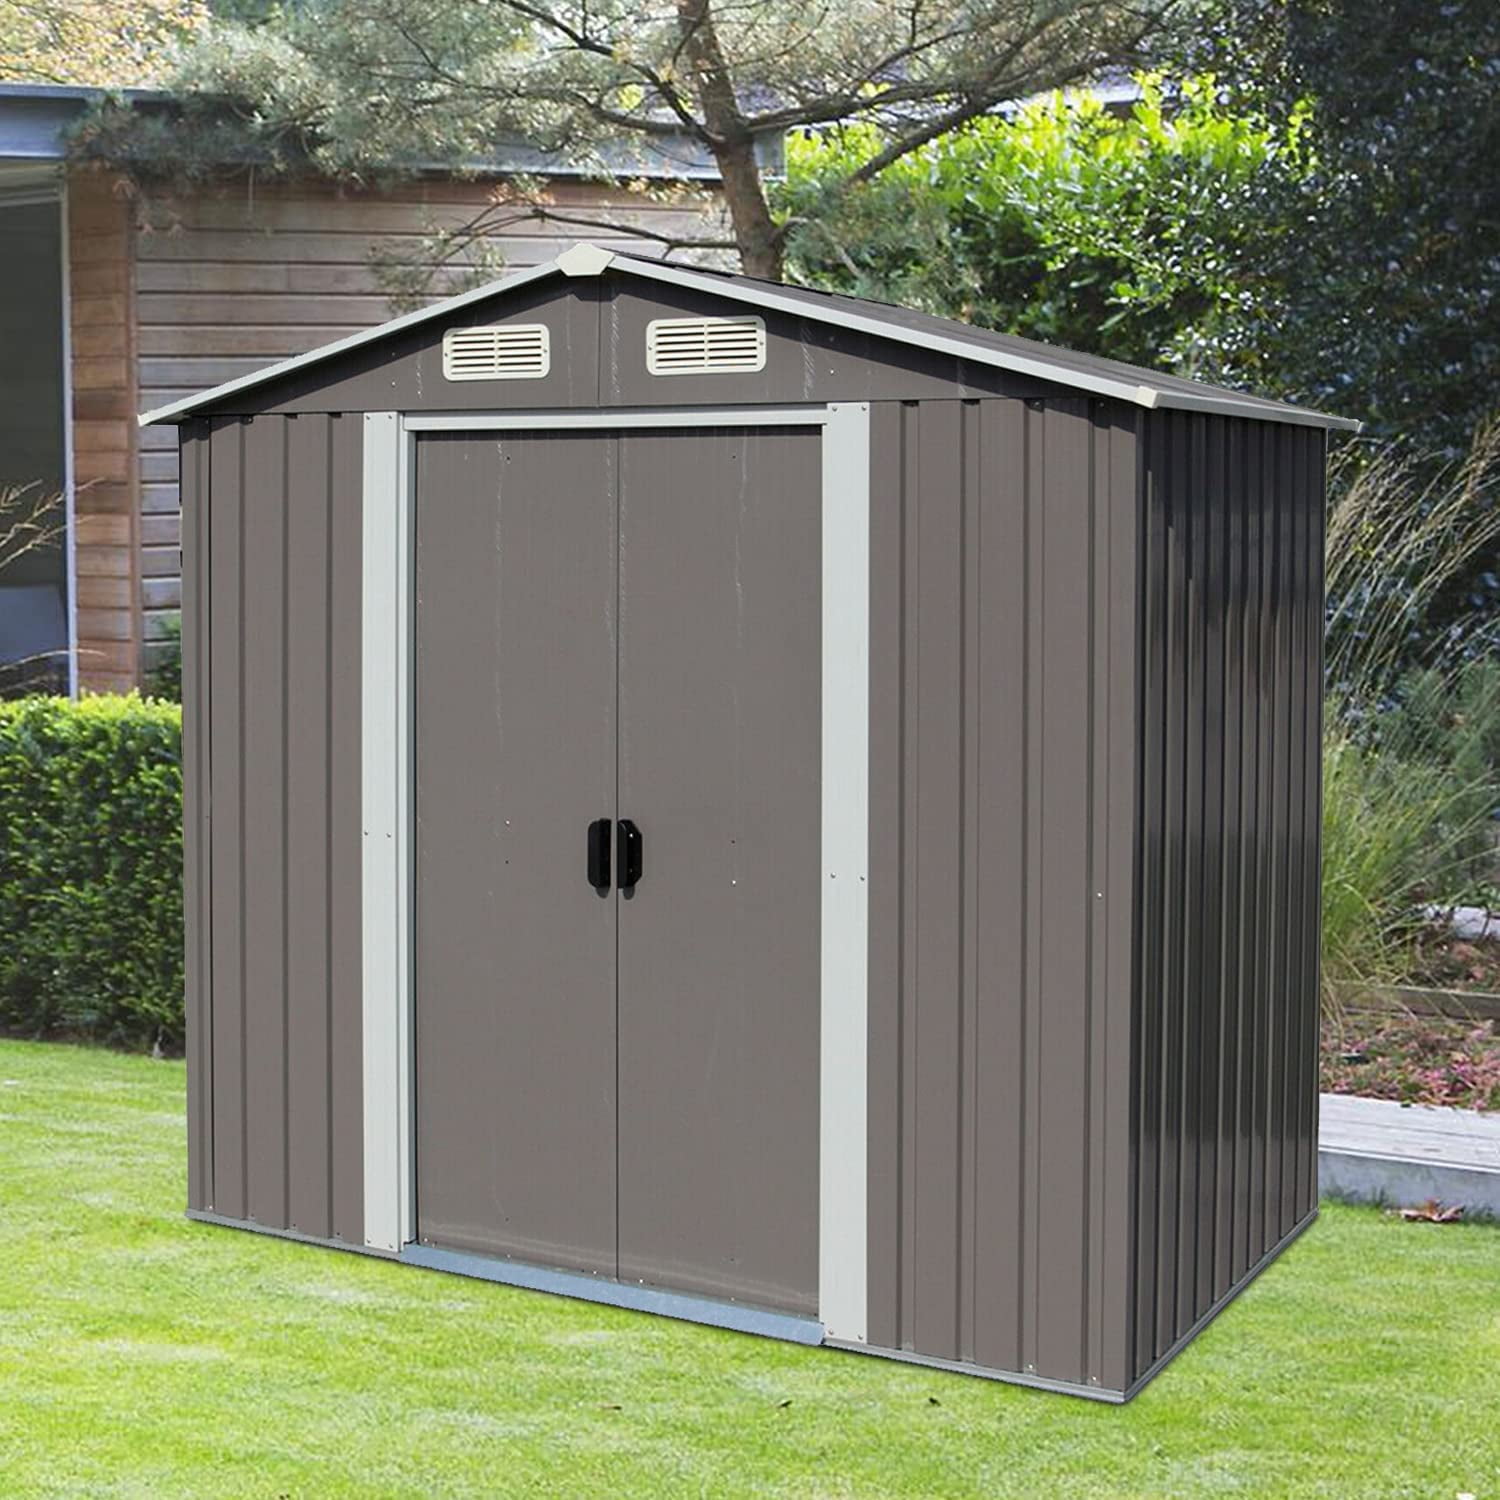 Lawn Green Betterland 4x6 FT Outdoor Storage Shed Patio Metal Garden Shed Tool House with Ventilation & Sliding Door for Garden Courtyard 